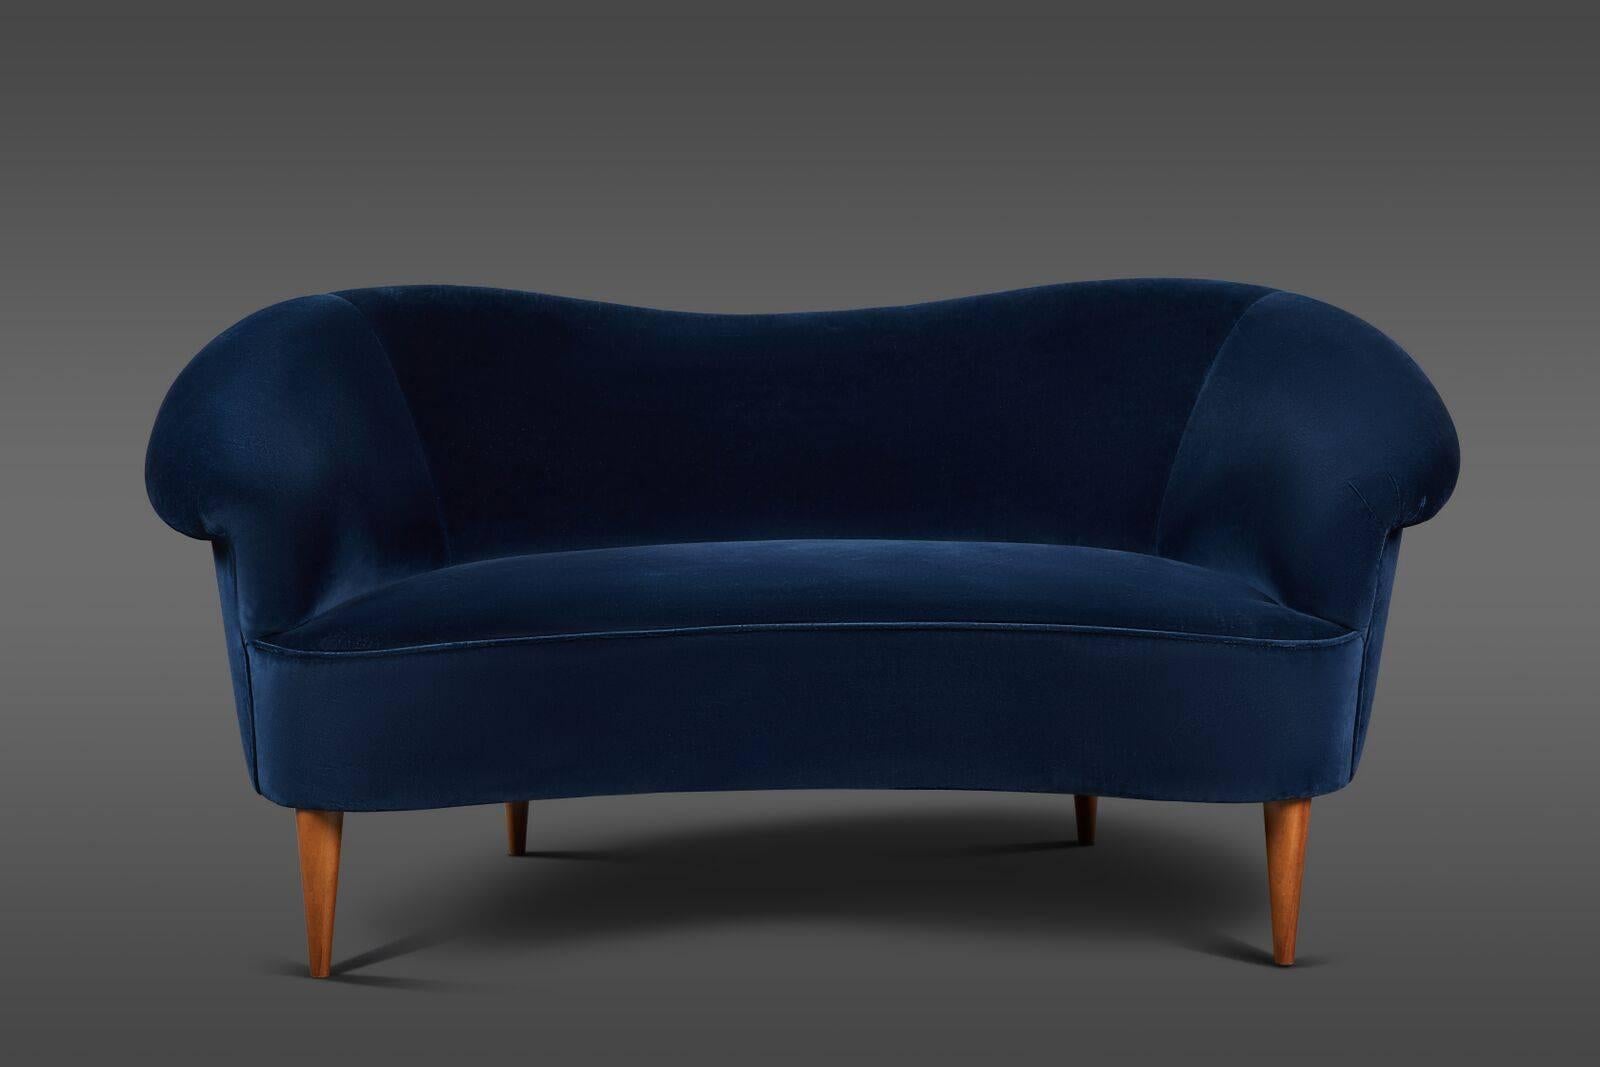 Elegant petite Italian blue velvet settee with conical wooden legs. Newly upholstered and truly lovely.